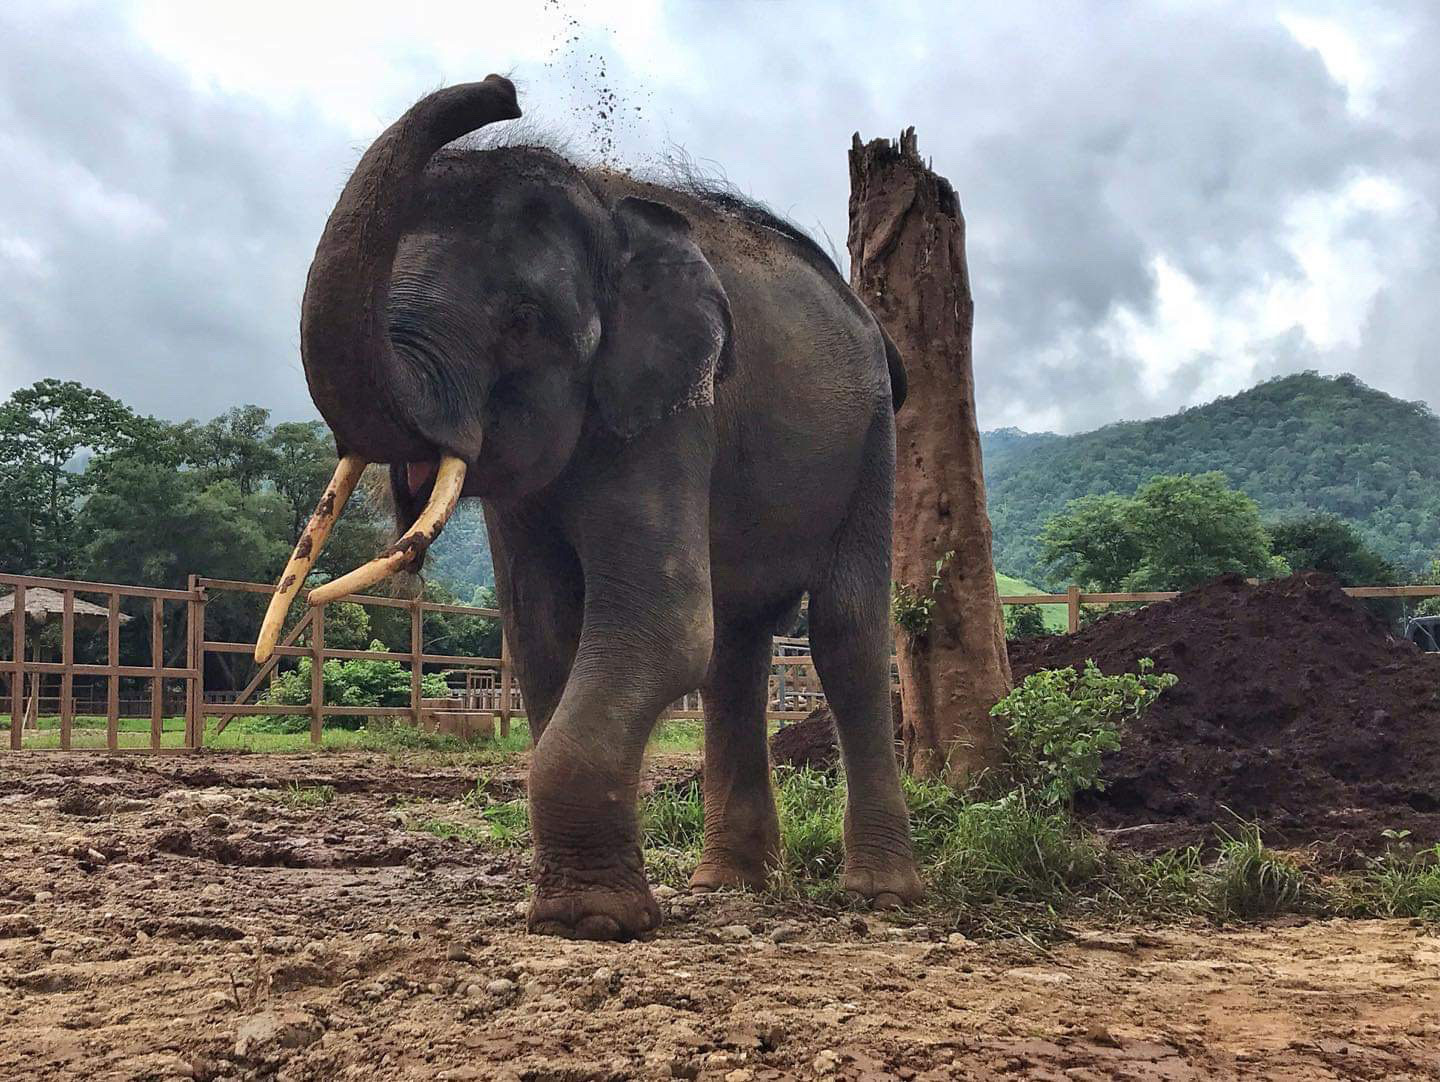 EXCLUSIVE: Injured Elephant Brought to Light by National Geographic Rescued in Thailand